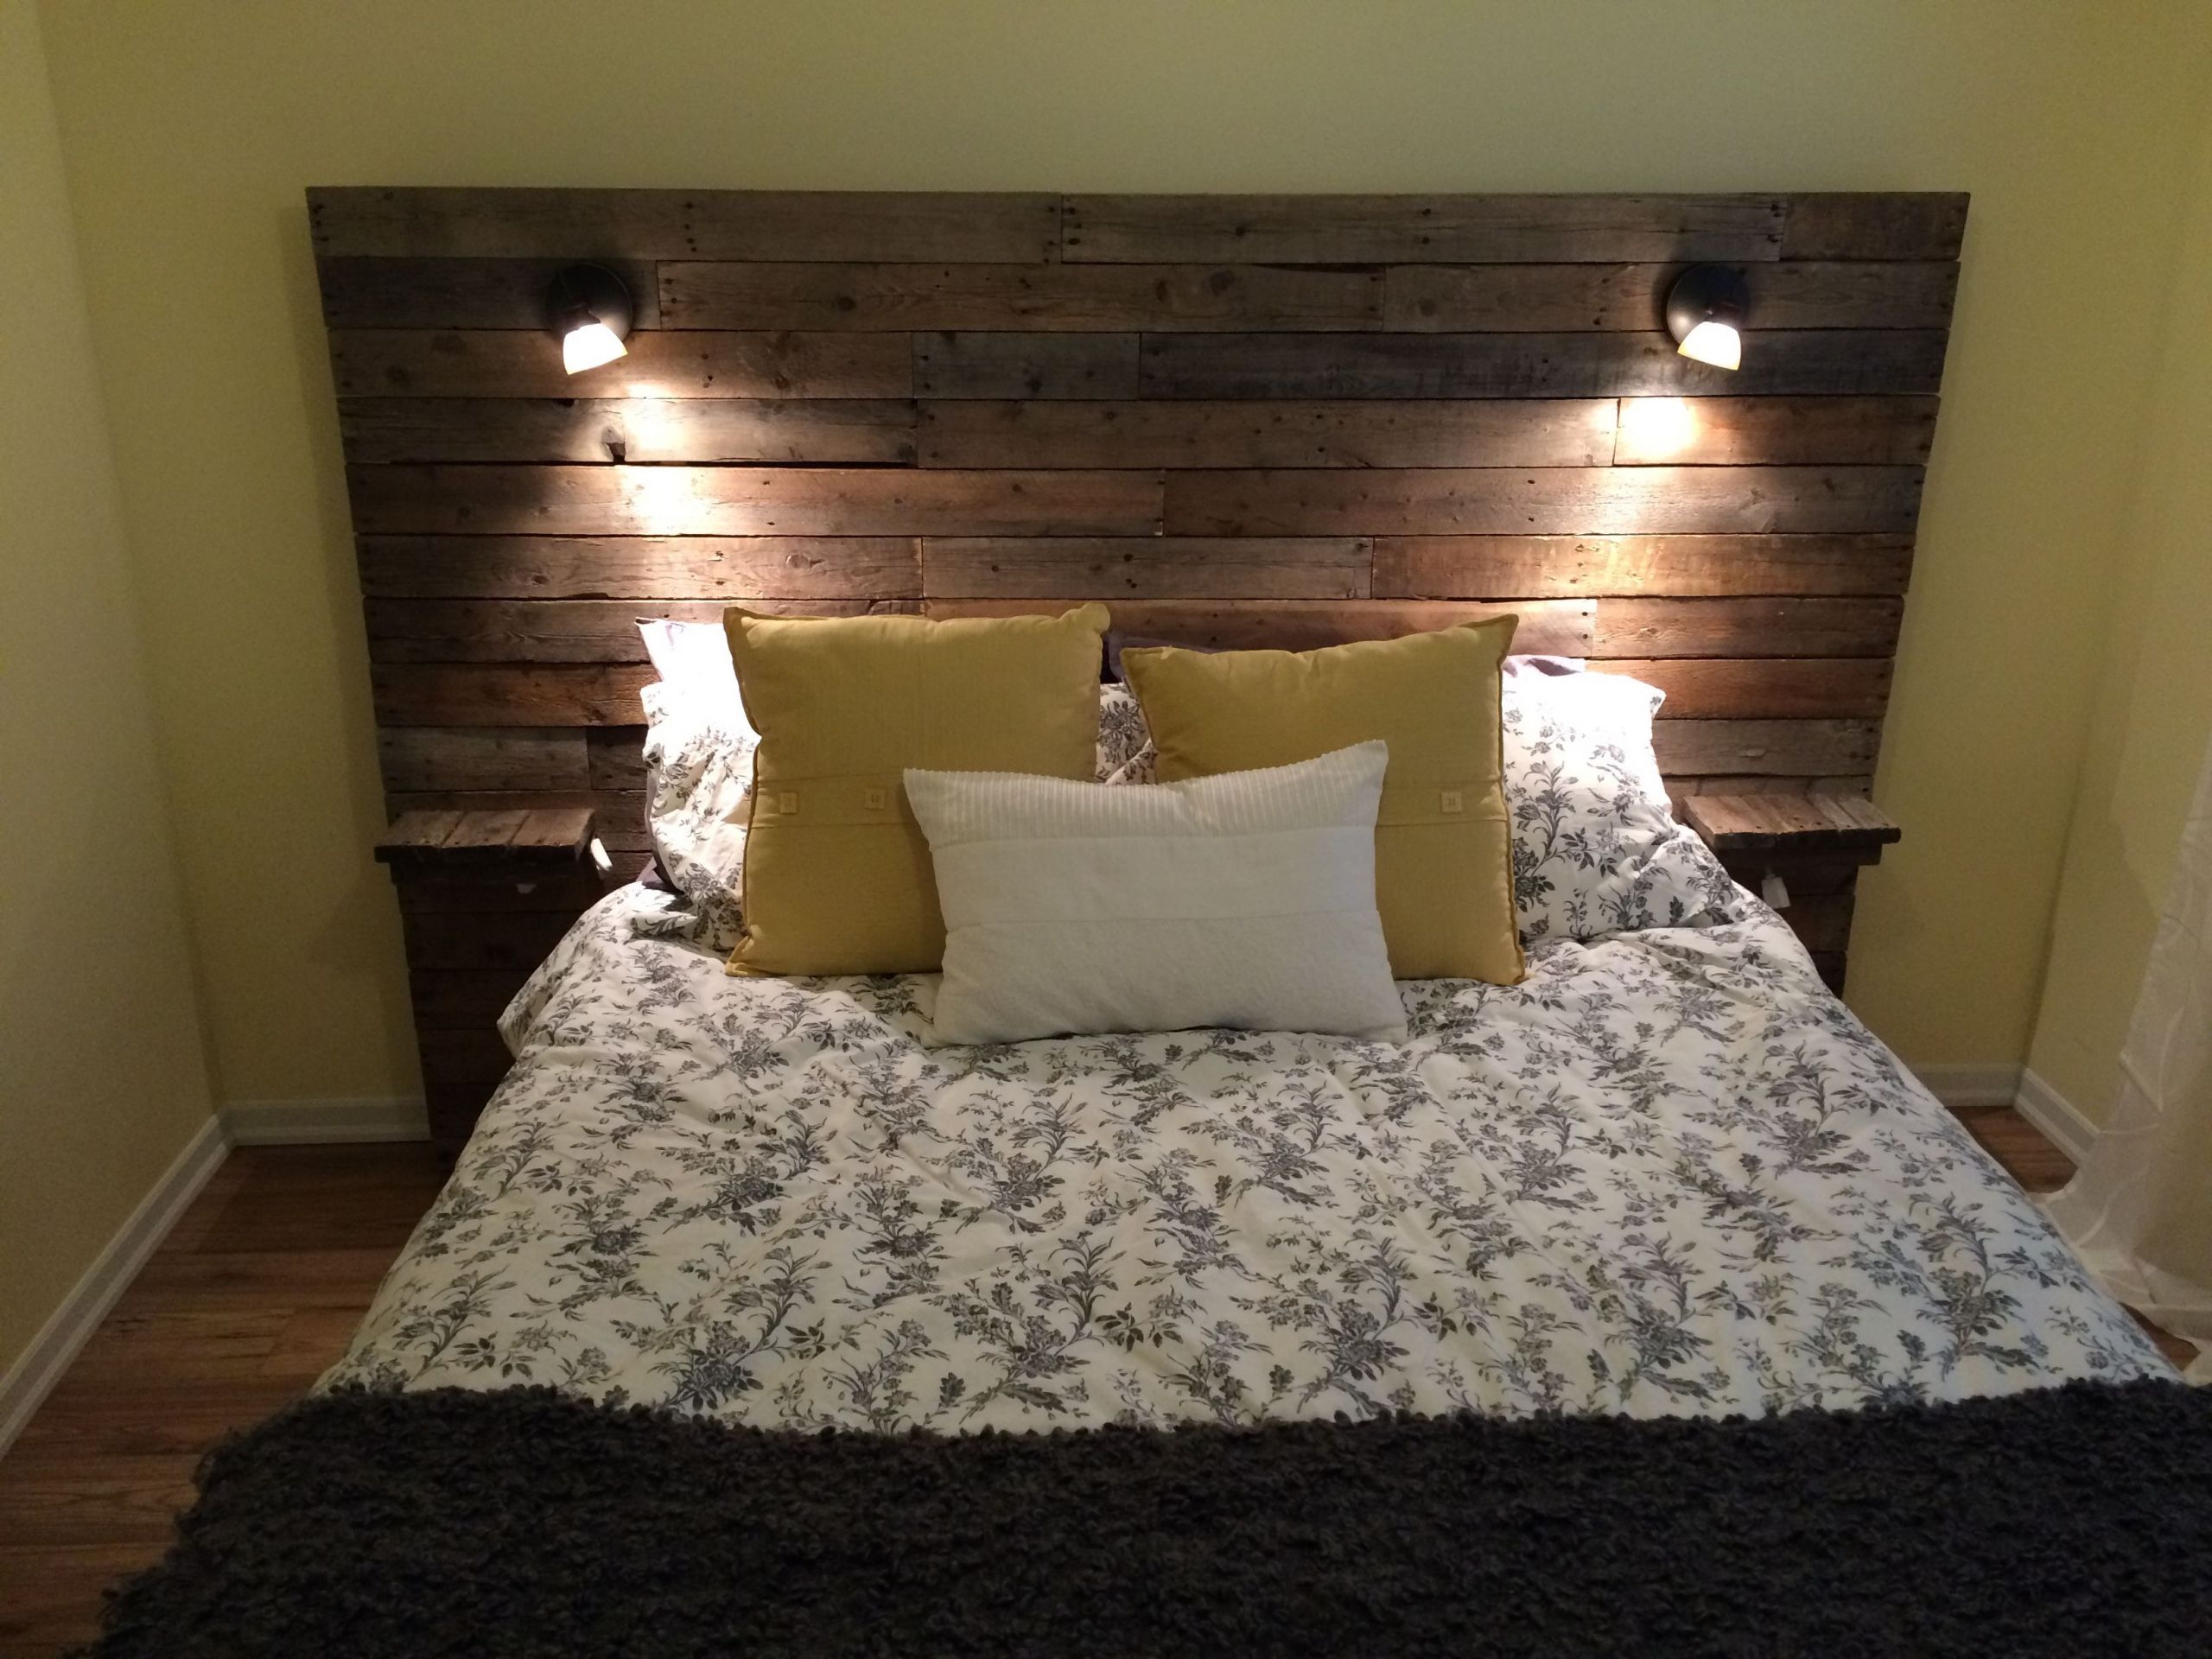 DIY Wood Headboard With Shelves
 Pallet headboard with shelf lights and plugs for cell